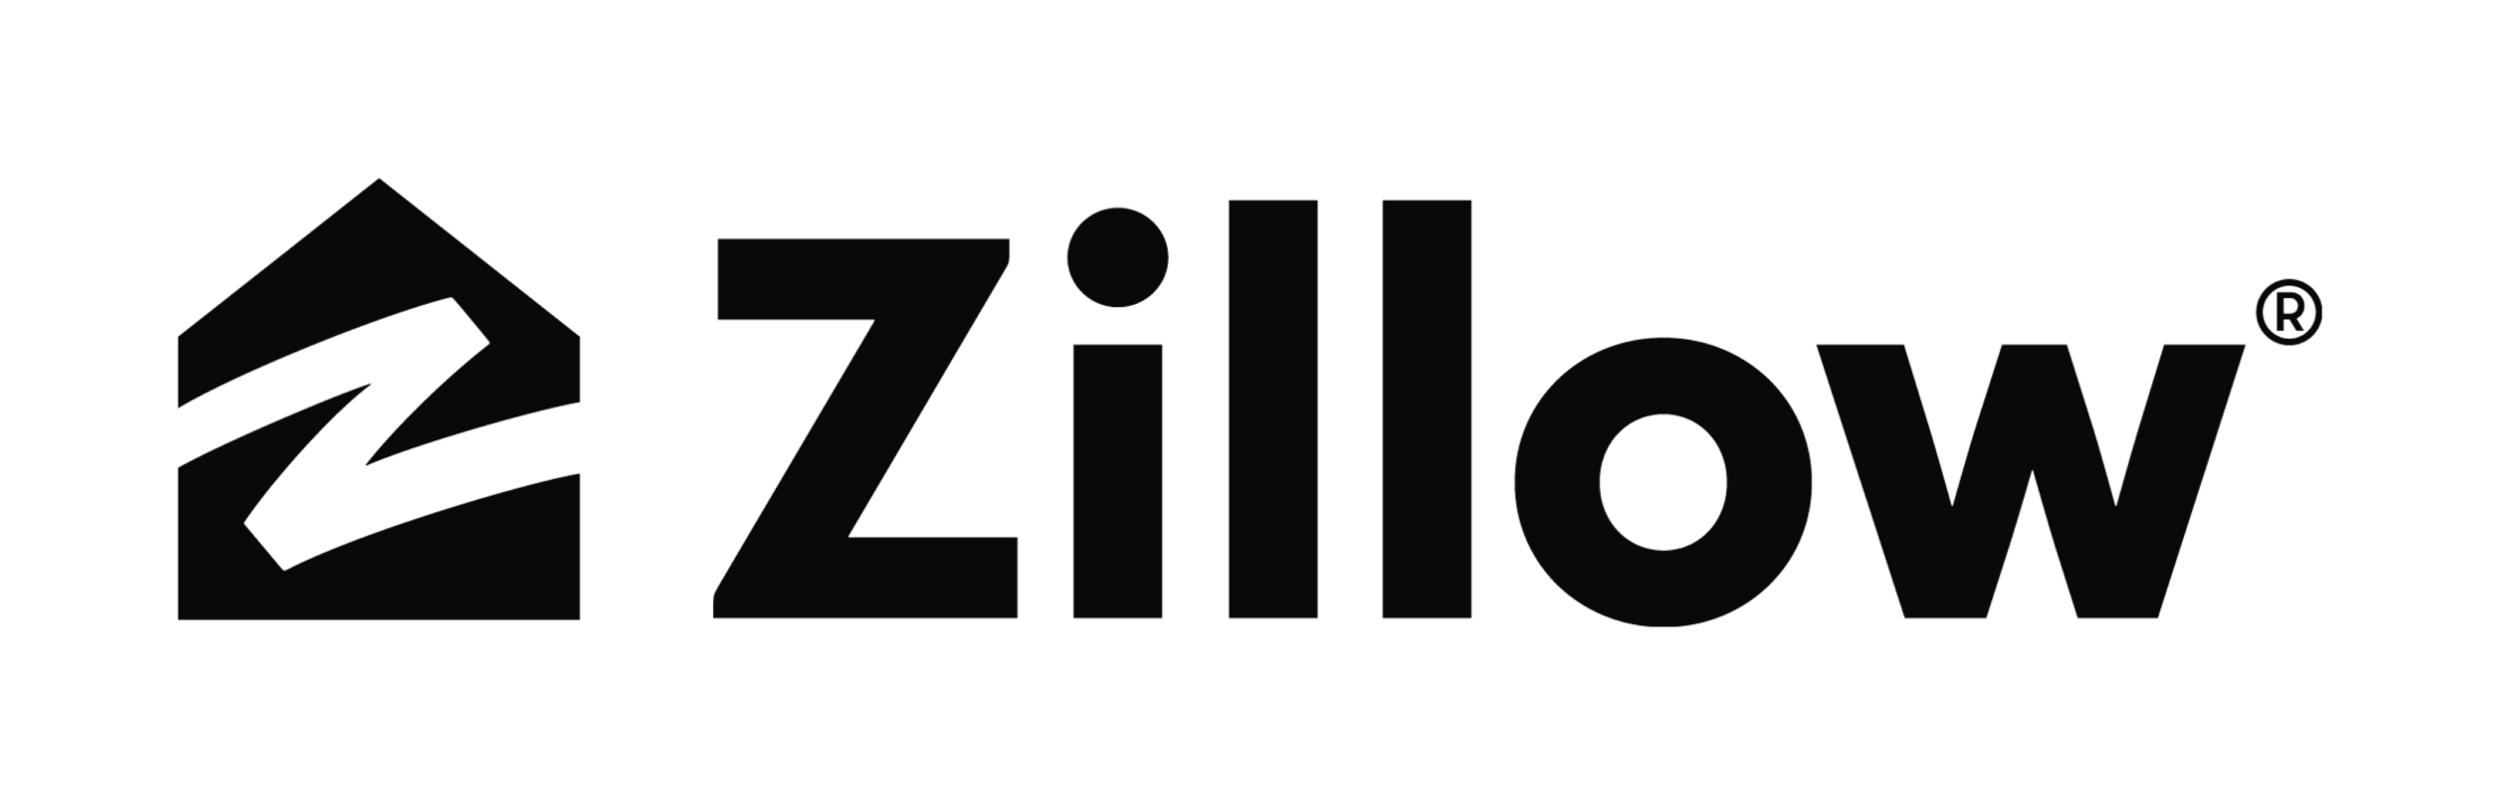 zillow_logo-1.png